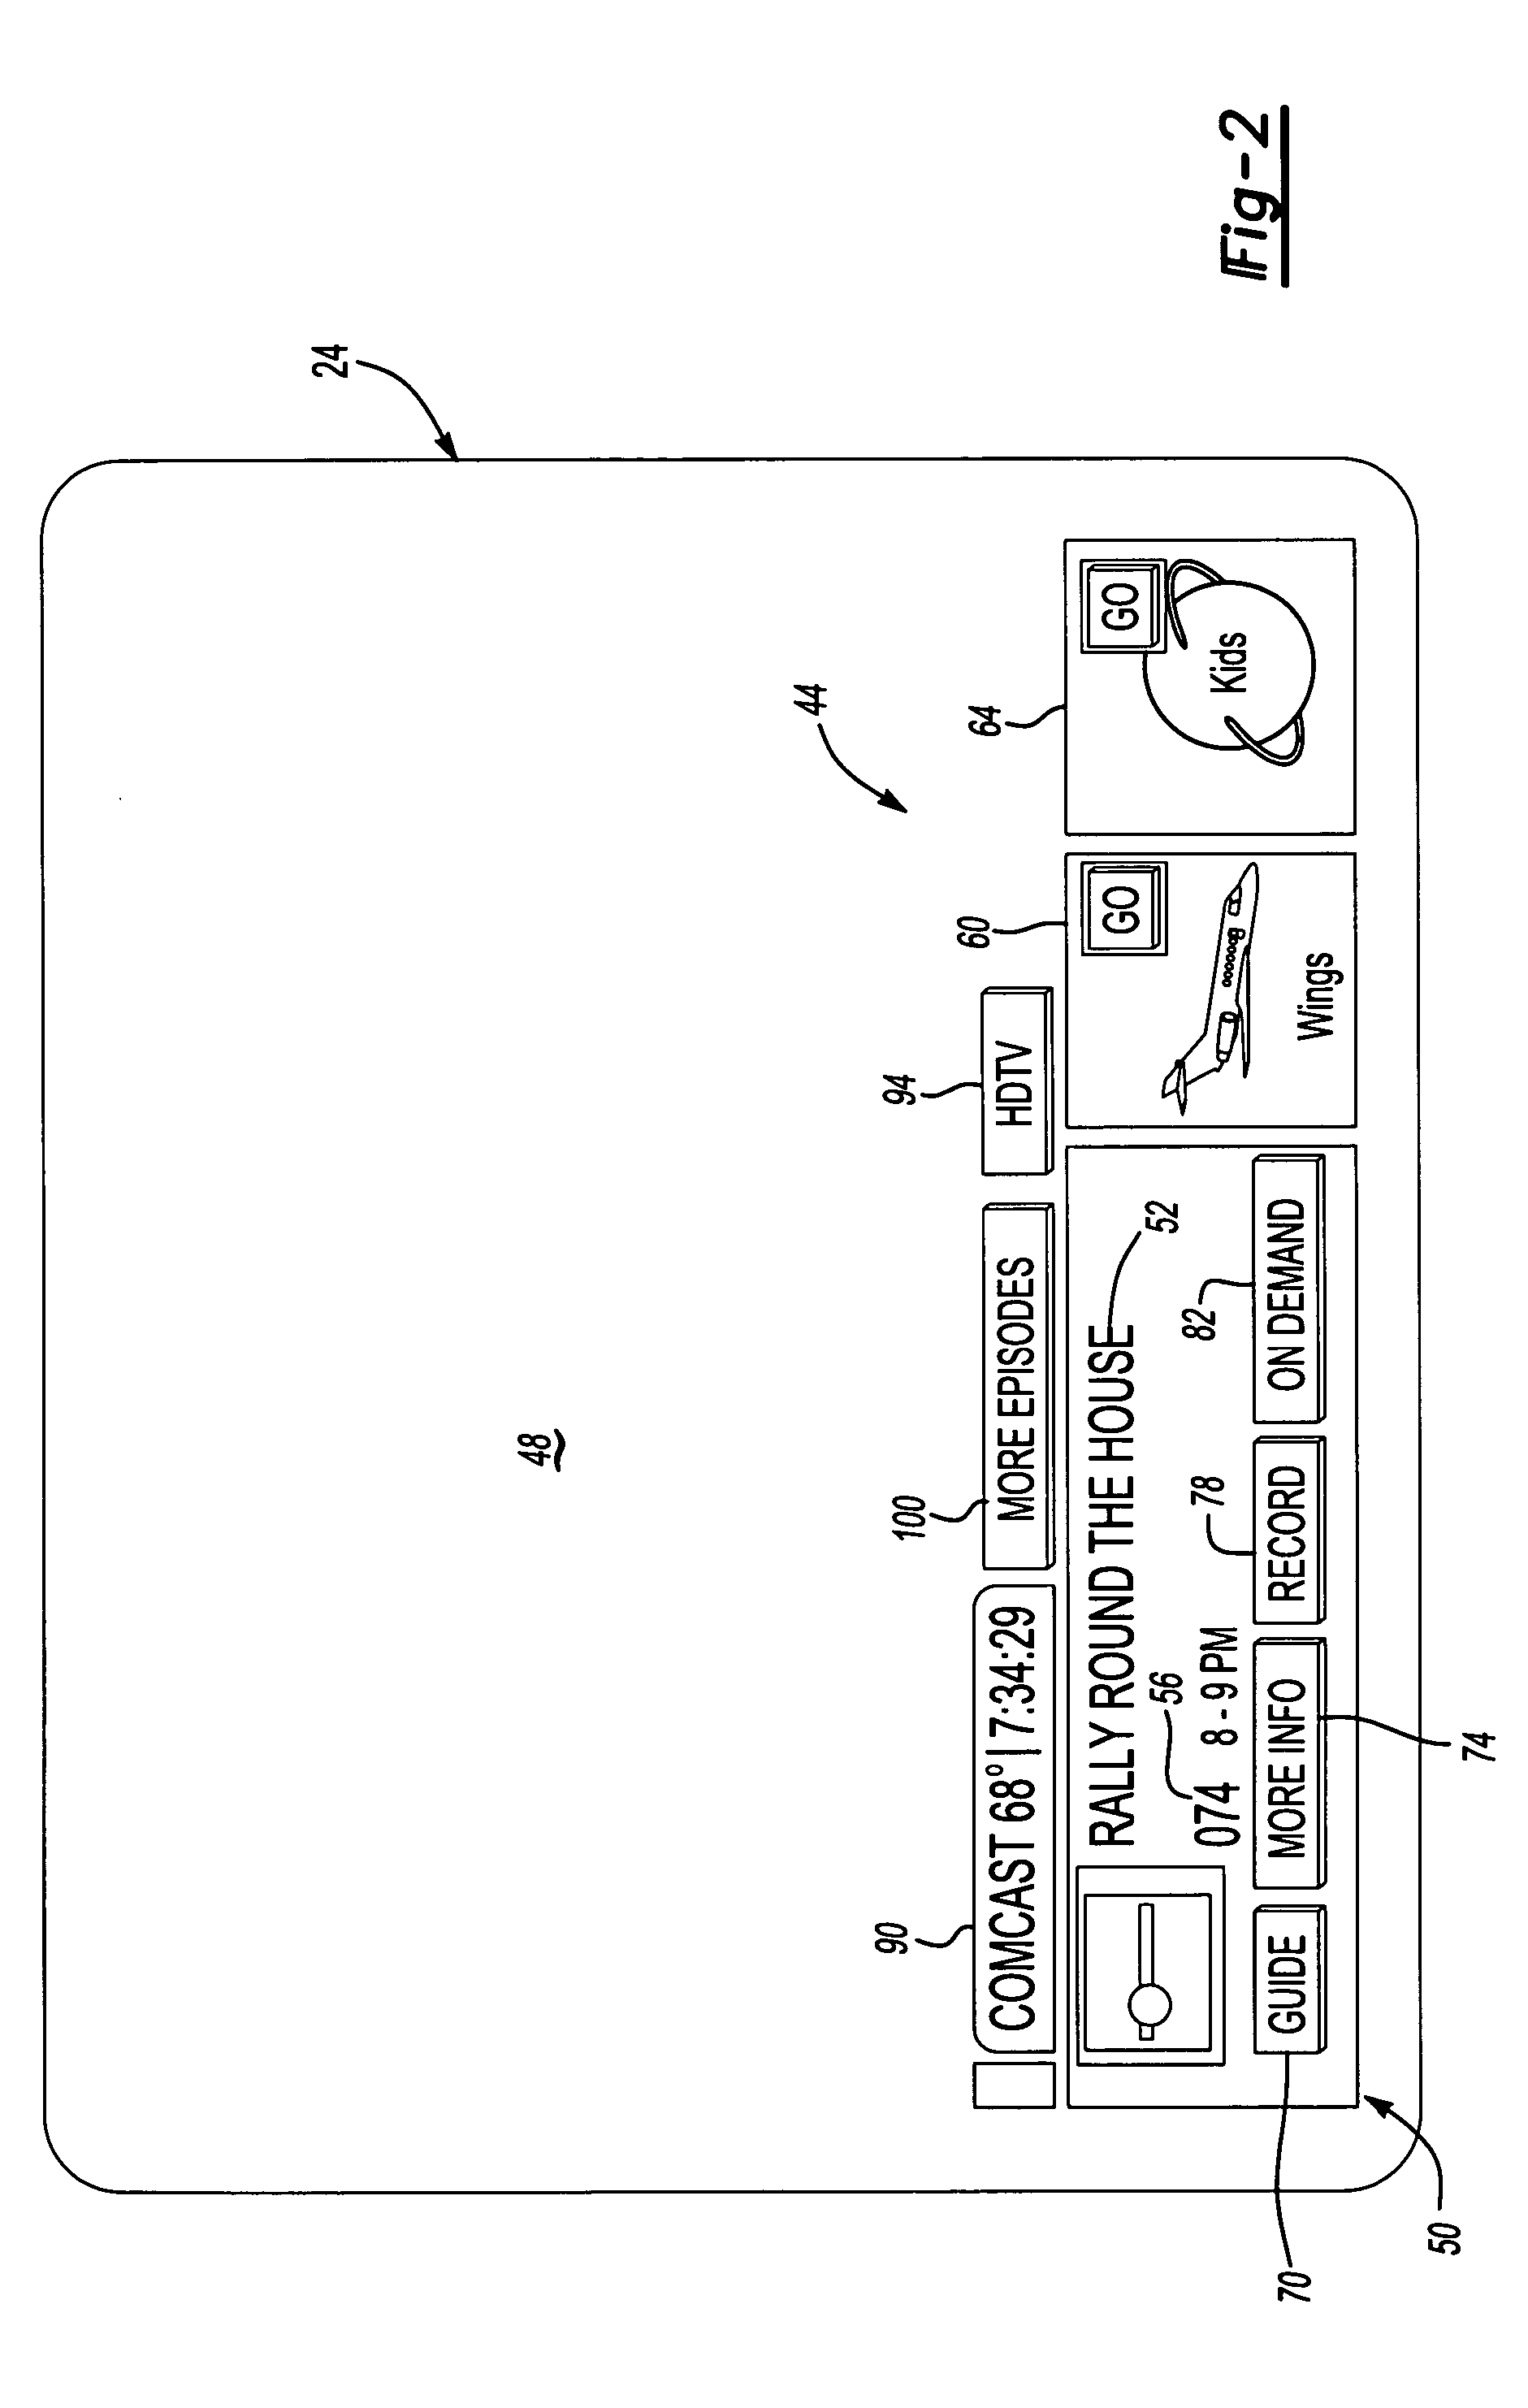 Method and system for providing on-demand viewing